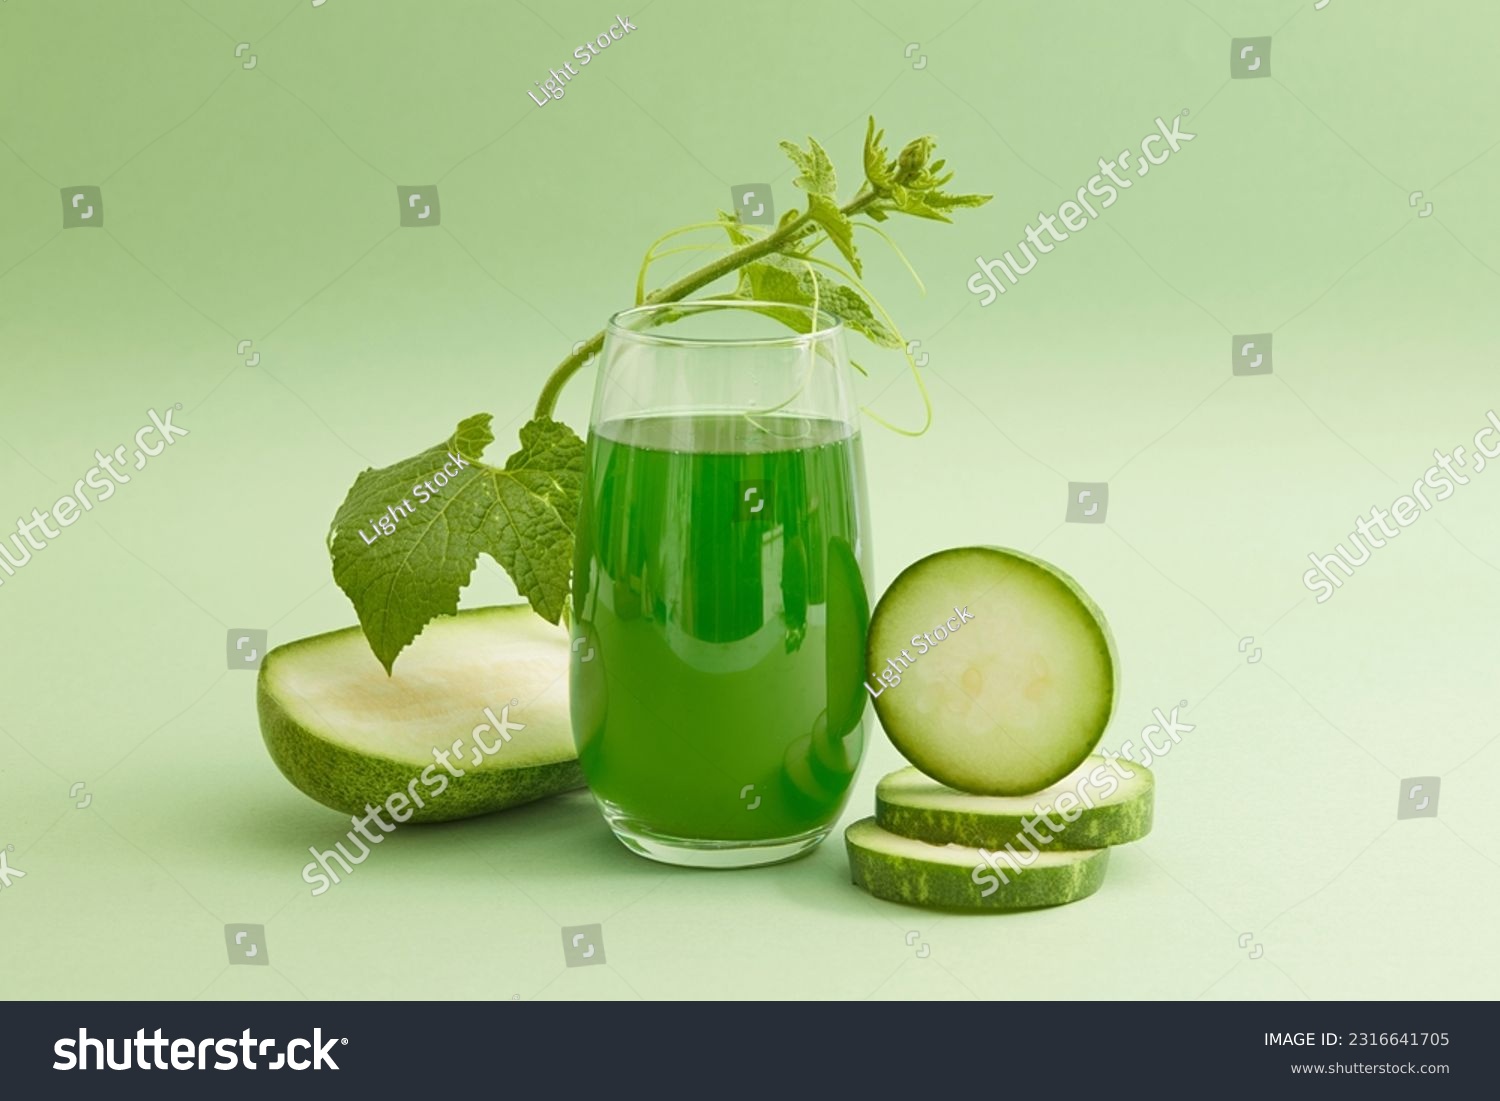 Front view of a glass of juice with fresh winter melon slices and leaf decorated on a light green background. Drinking winter melon tea regularly helps cool the body very well on hot days. #2316641705